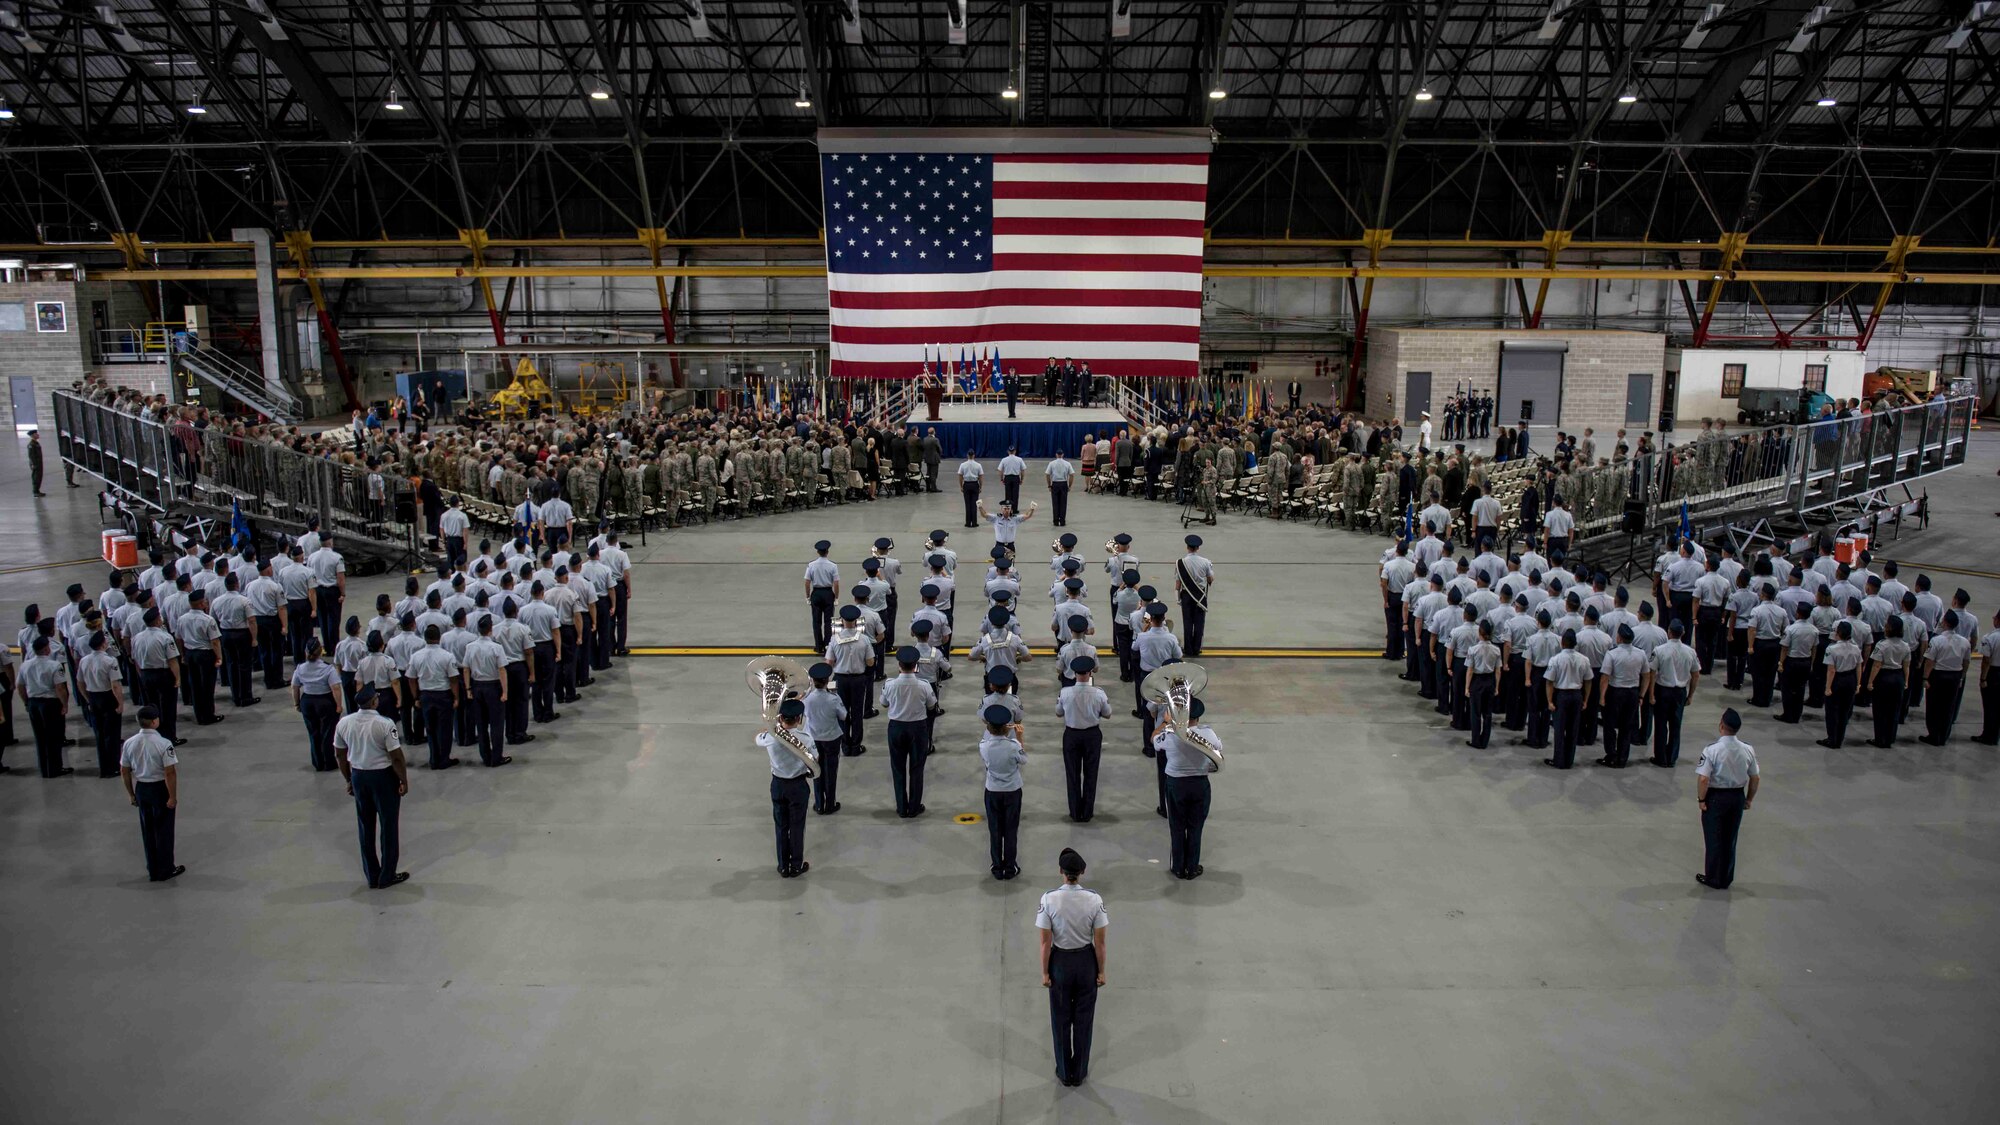 Air Force Chief of Staff Gen. David L. Goldfein stands at the front of the stage, preparing to dismiss hundreds of attendees during the Air Mobility Command change of command, where Gen. Maryanne Miller assumed command of AMC, Scott Air Force Base, Illinois, Sept. 7, 2018. Miller assumed command from Gen. Carlton D. Everhart II, who retires after 35 years of service to the Air Force. AMC provides rapid global air mobility and sustainment for America's armed forces through airlift, aerial refueling, aeromedical evacuation and mobility support.  (U.S. Air Force photo by Tech. Sgt. Jodi Martinez)